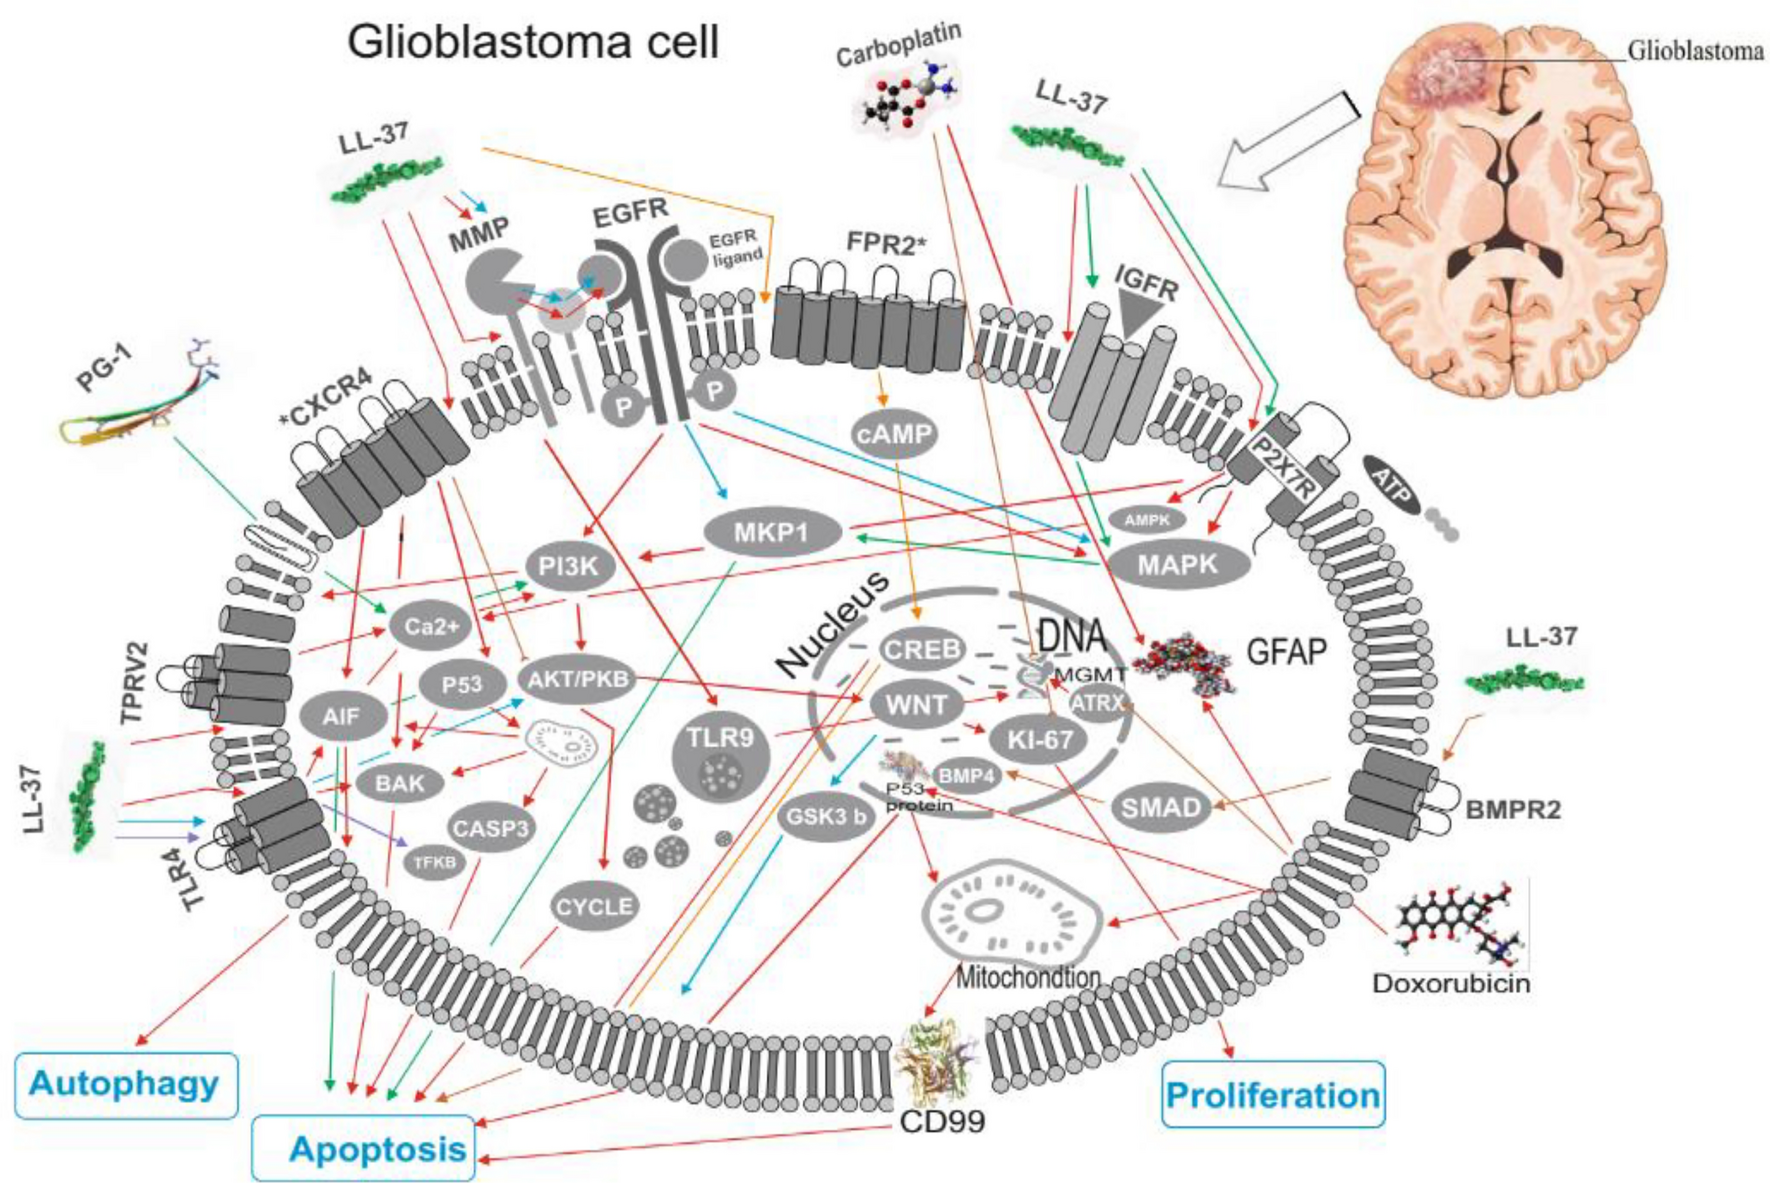 Expression of molecular markers and synergistic anticancer effects of chemotherapy with antimicrobial peptides on glioblastoma cells